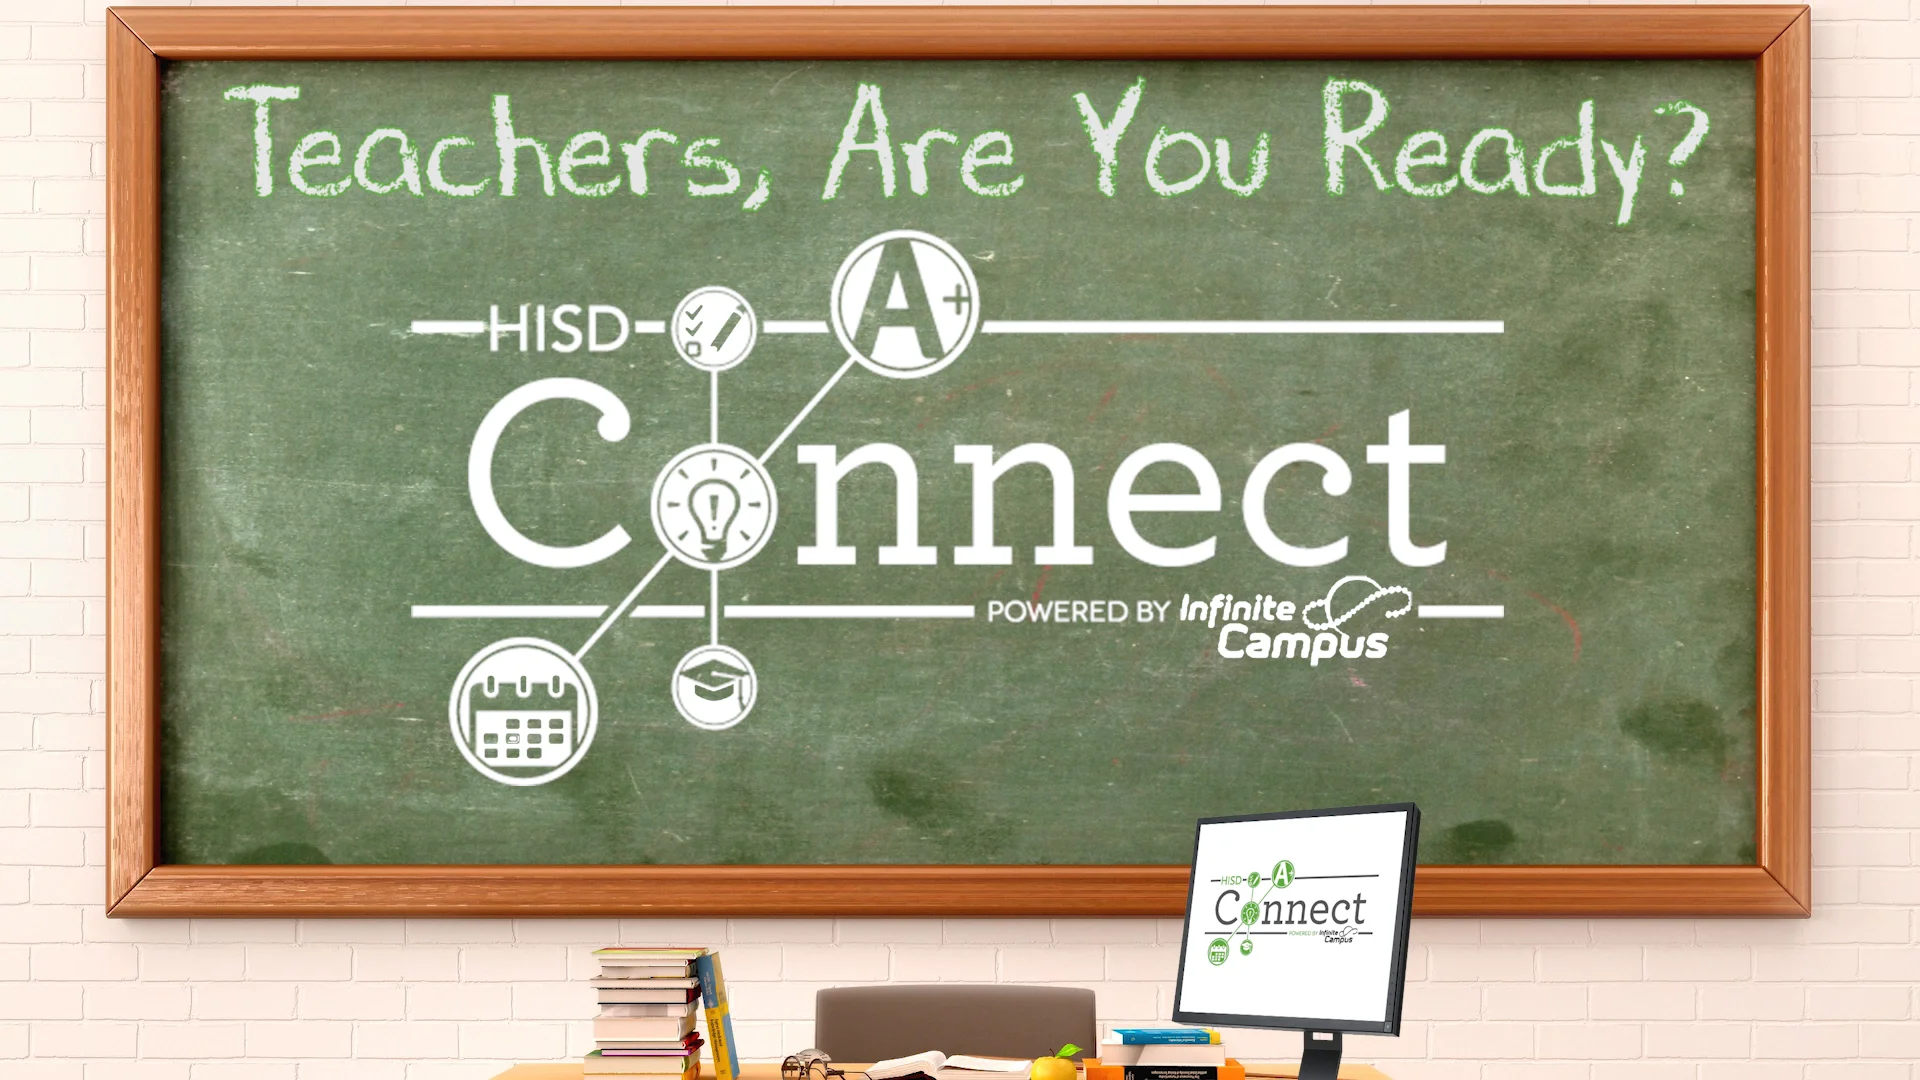 HISD Connect